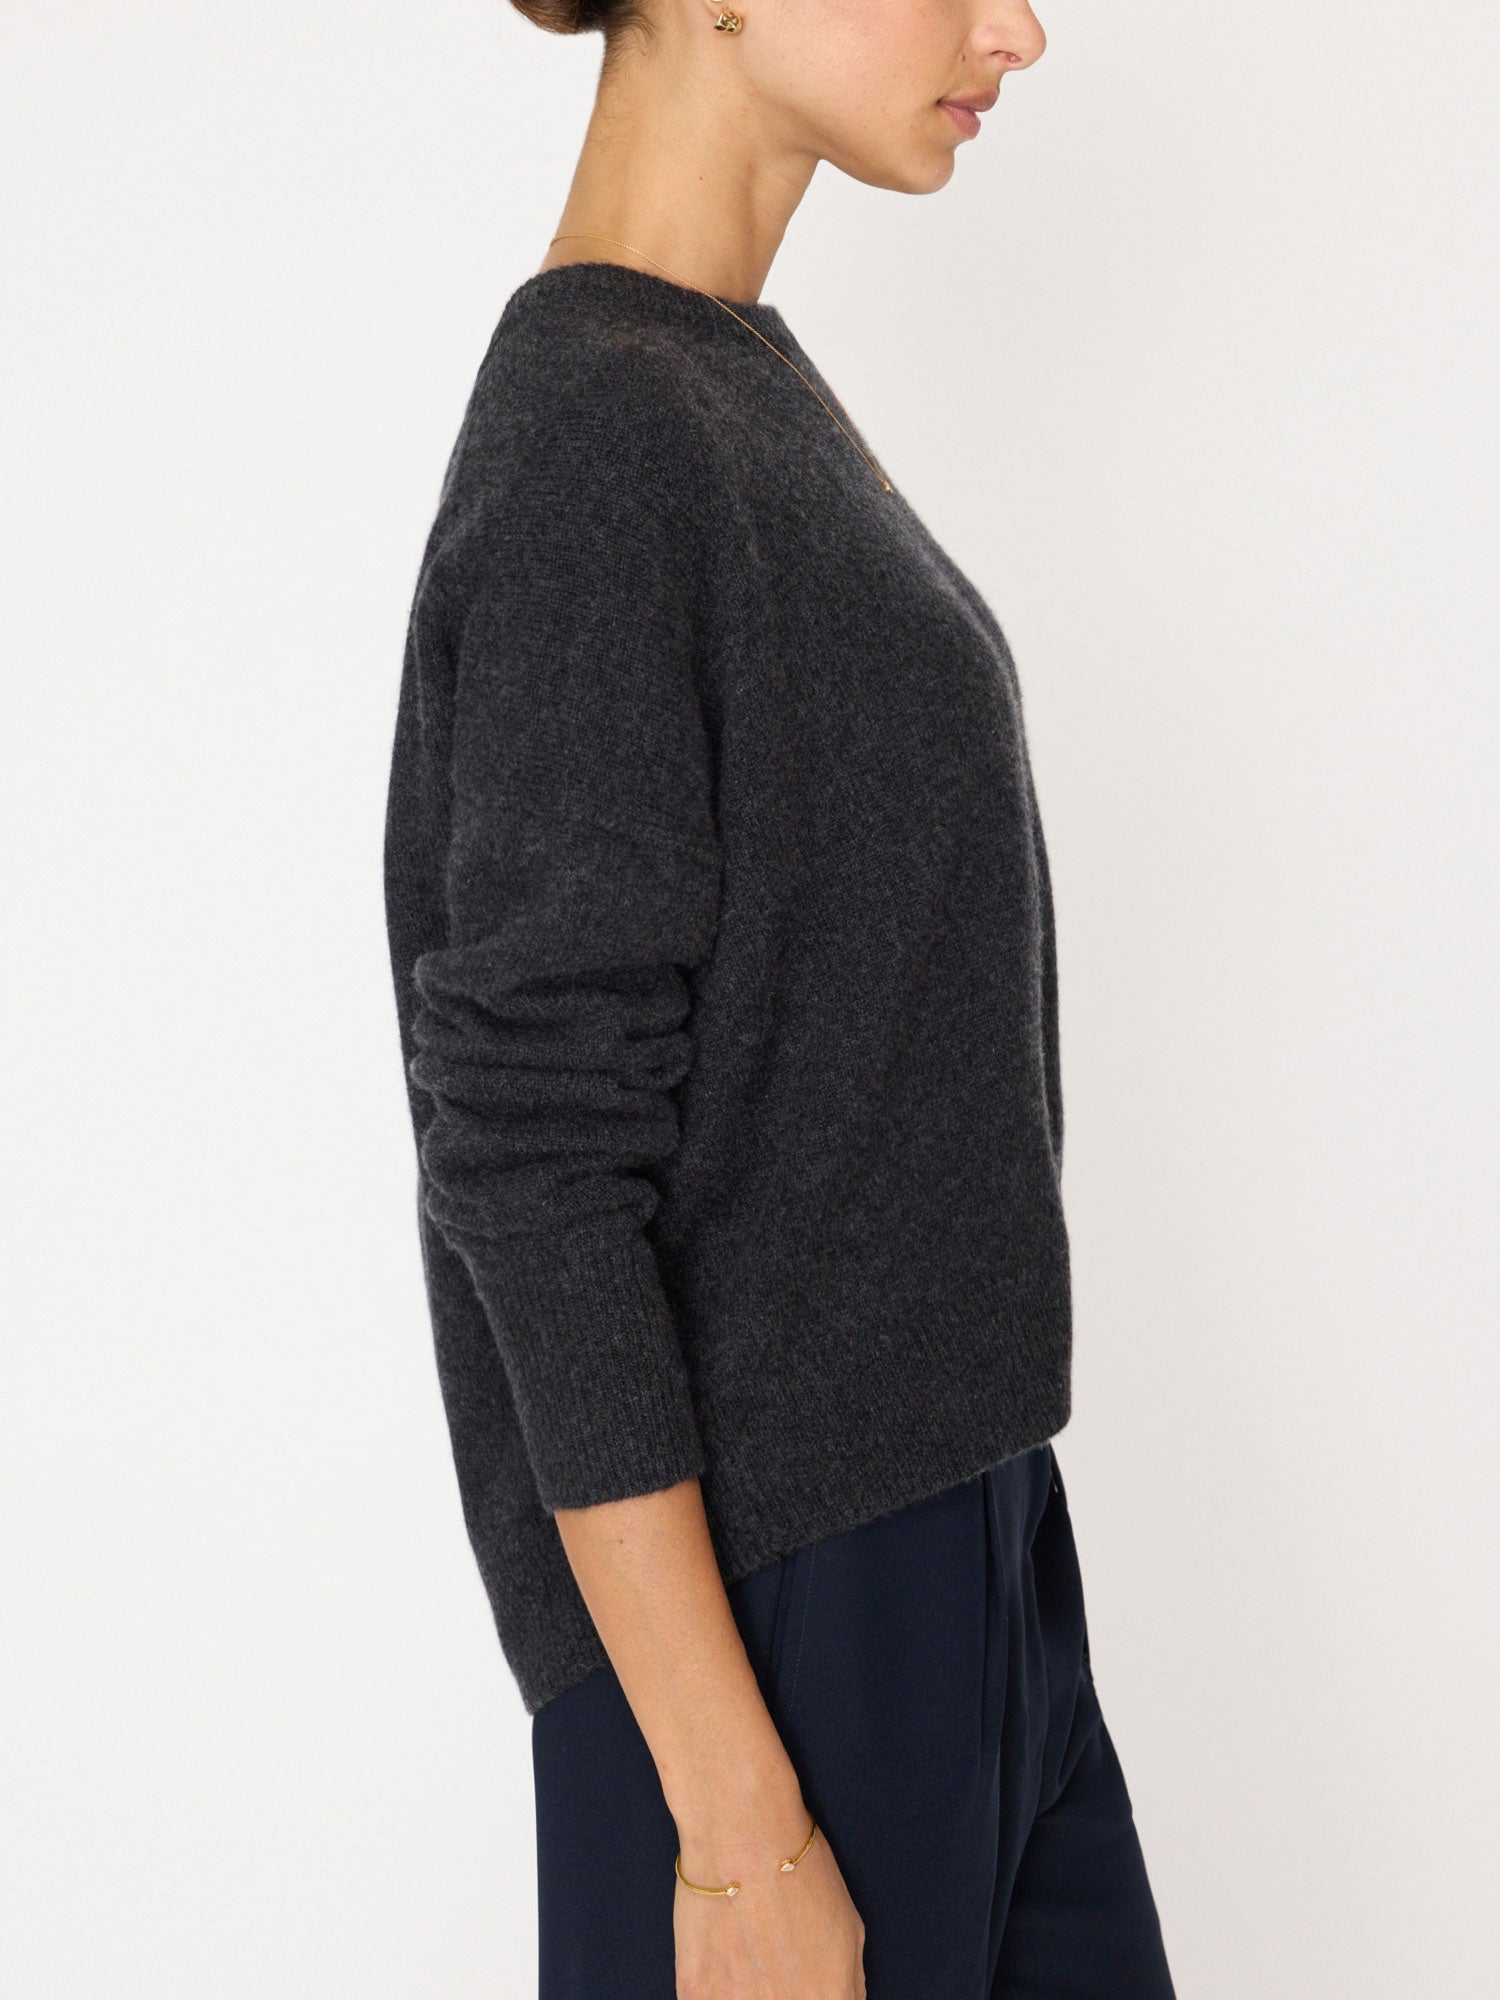 Everyday cashmere crewneck grey sweater side view2